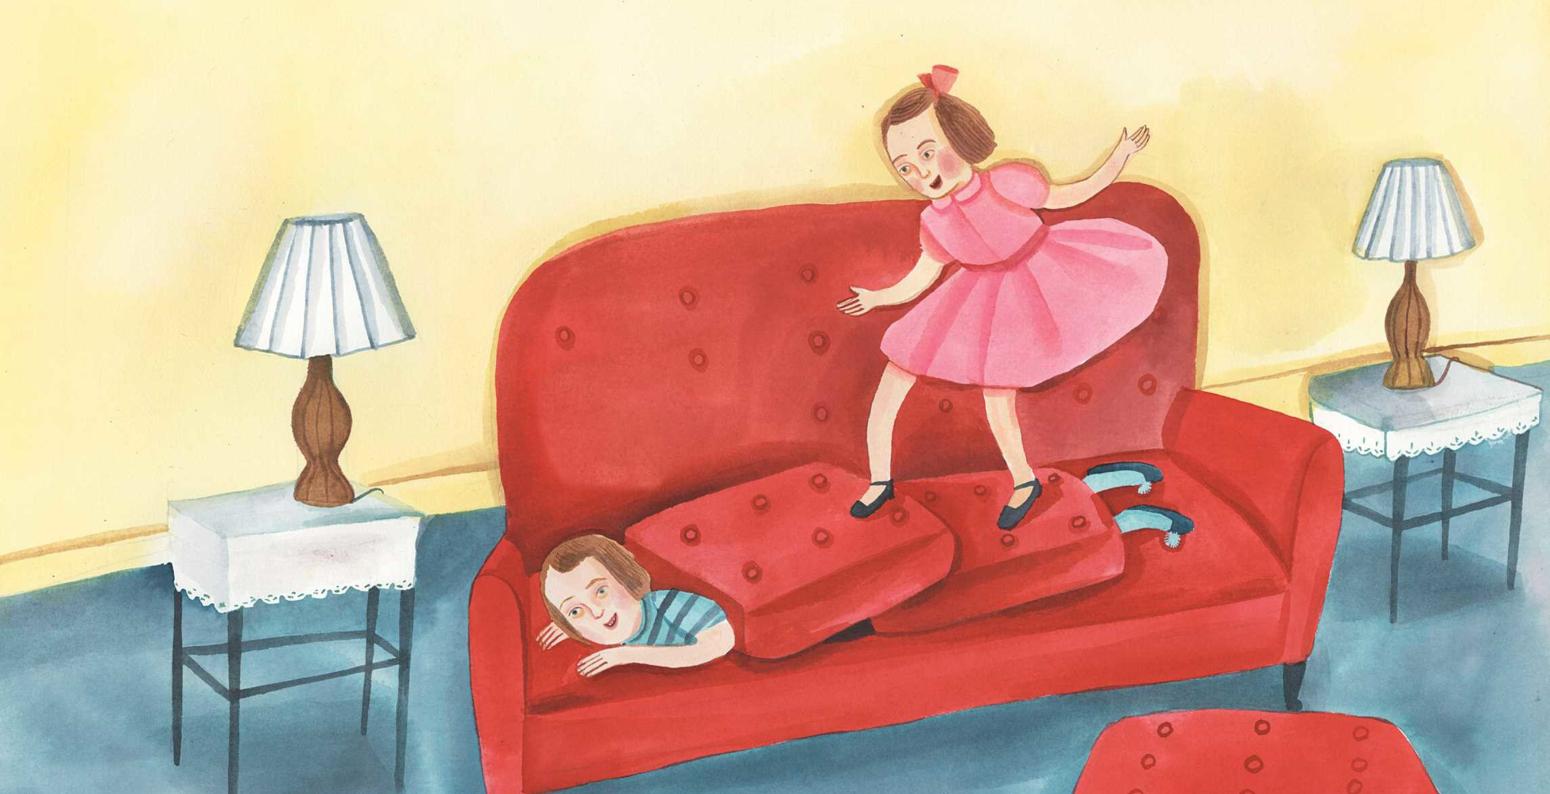 A young Temple Grandin under red sofa covers as her little sister hops on top of the cushions.